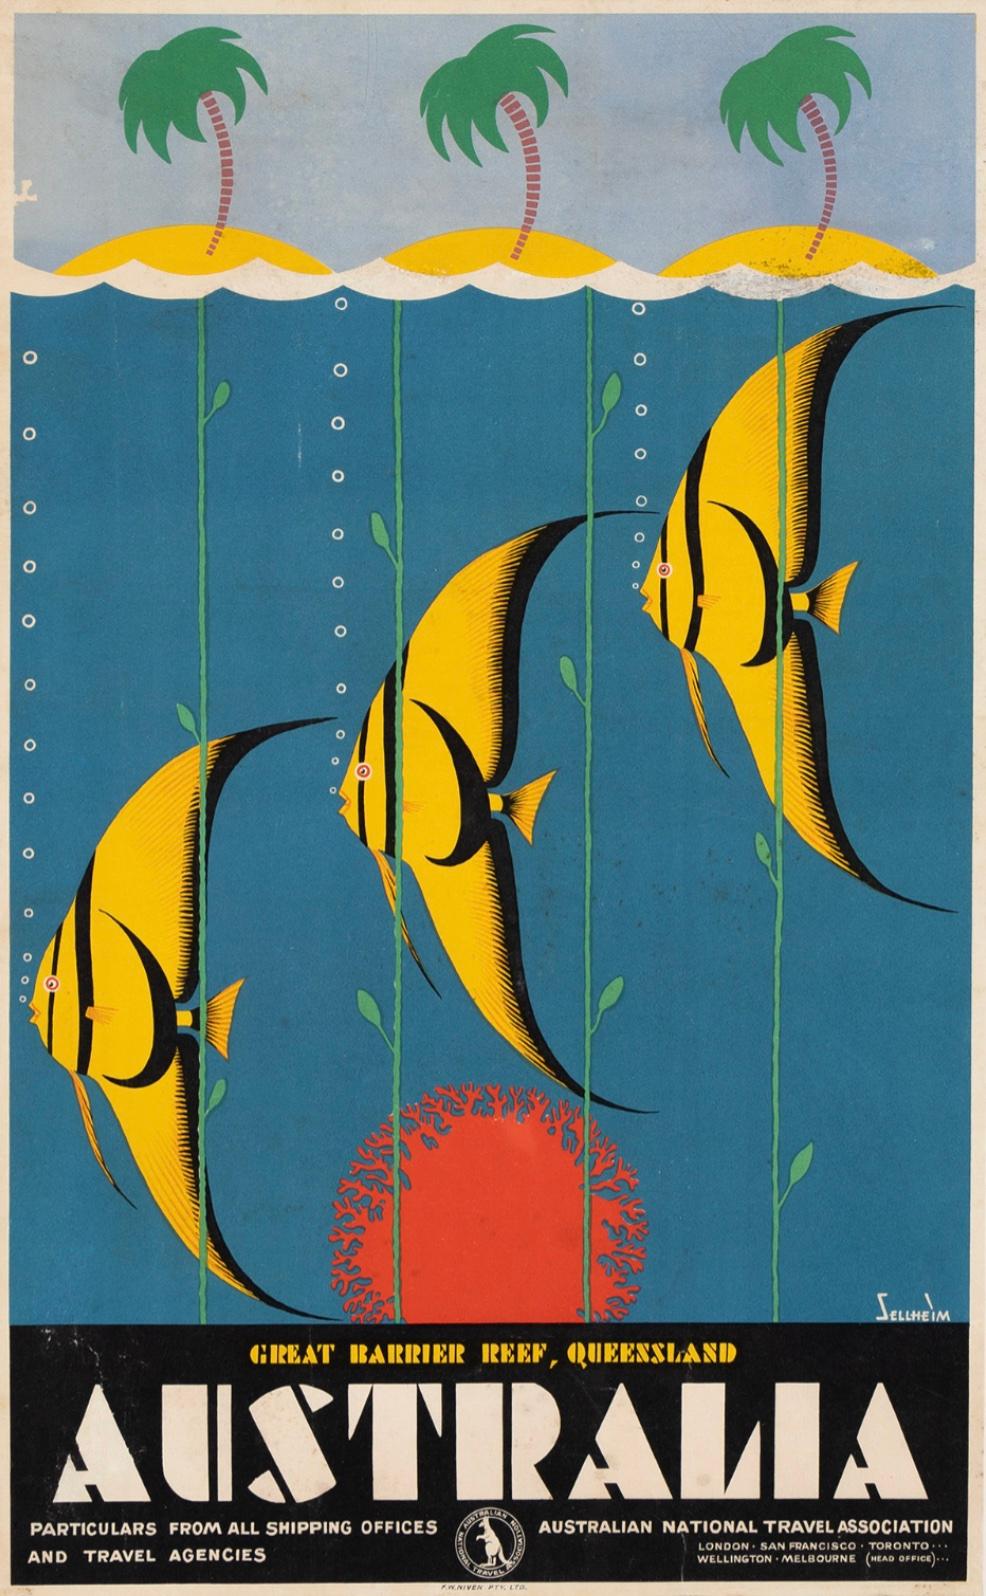 'AUSTRALIA' Great Barrier Reef Queensland, by Sellheim, 1937

Selling ‘Australia’ to the world, this poster designed by Gert Sellheim depicts the natural wonder of the Great Barrier Reef, in Queensland. This is a rare poster from 1937, and a